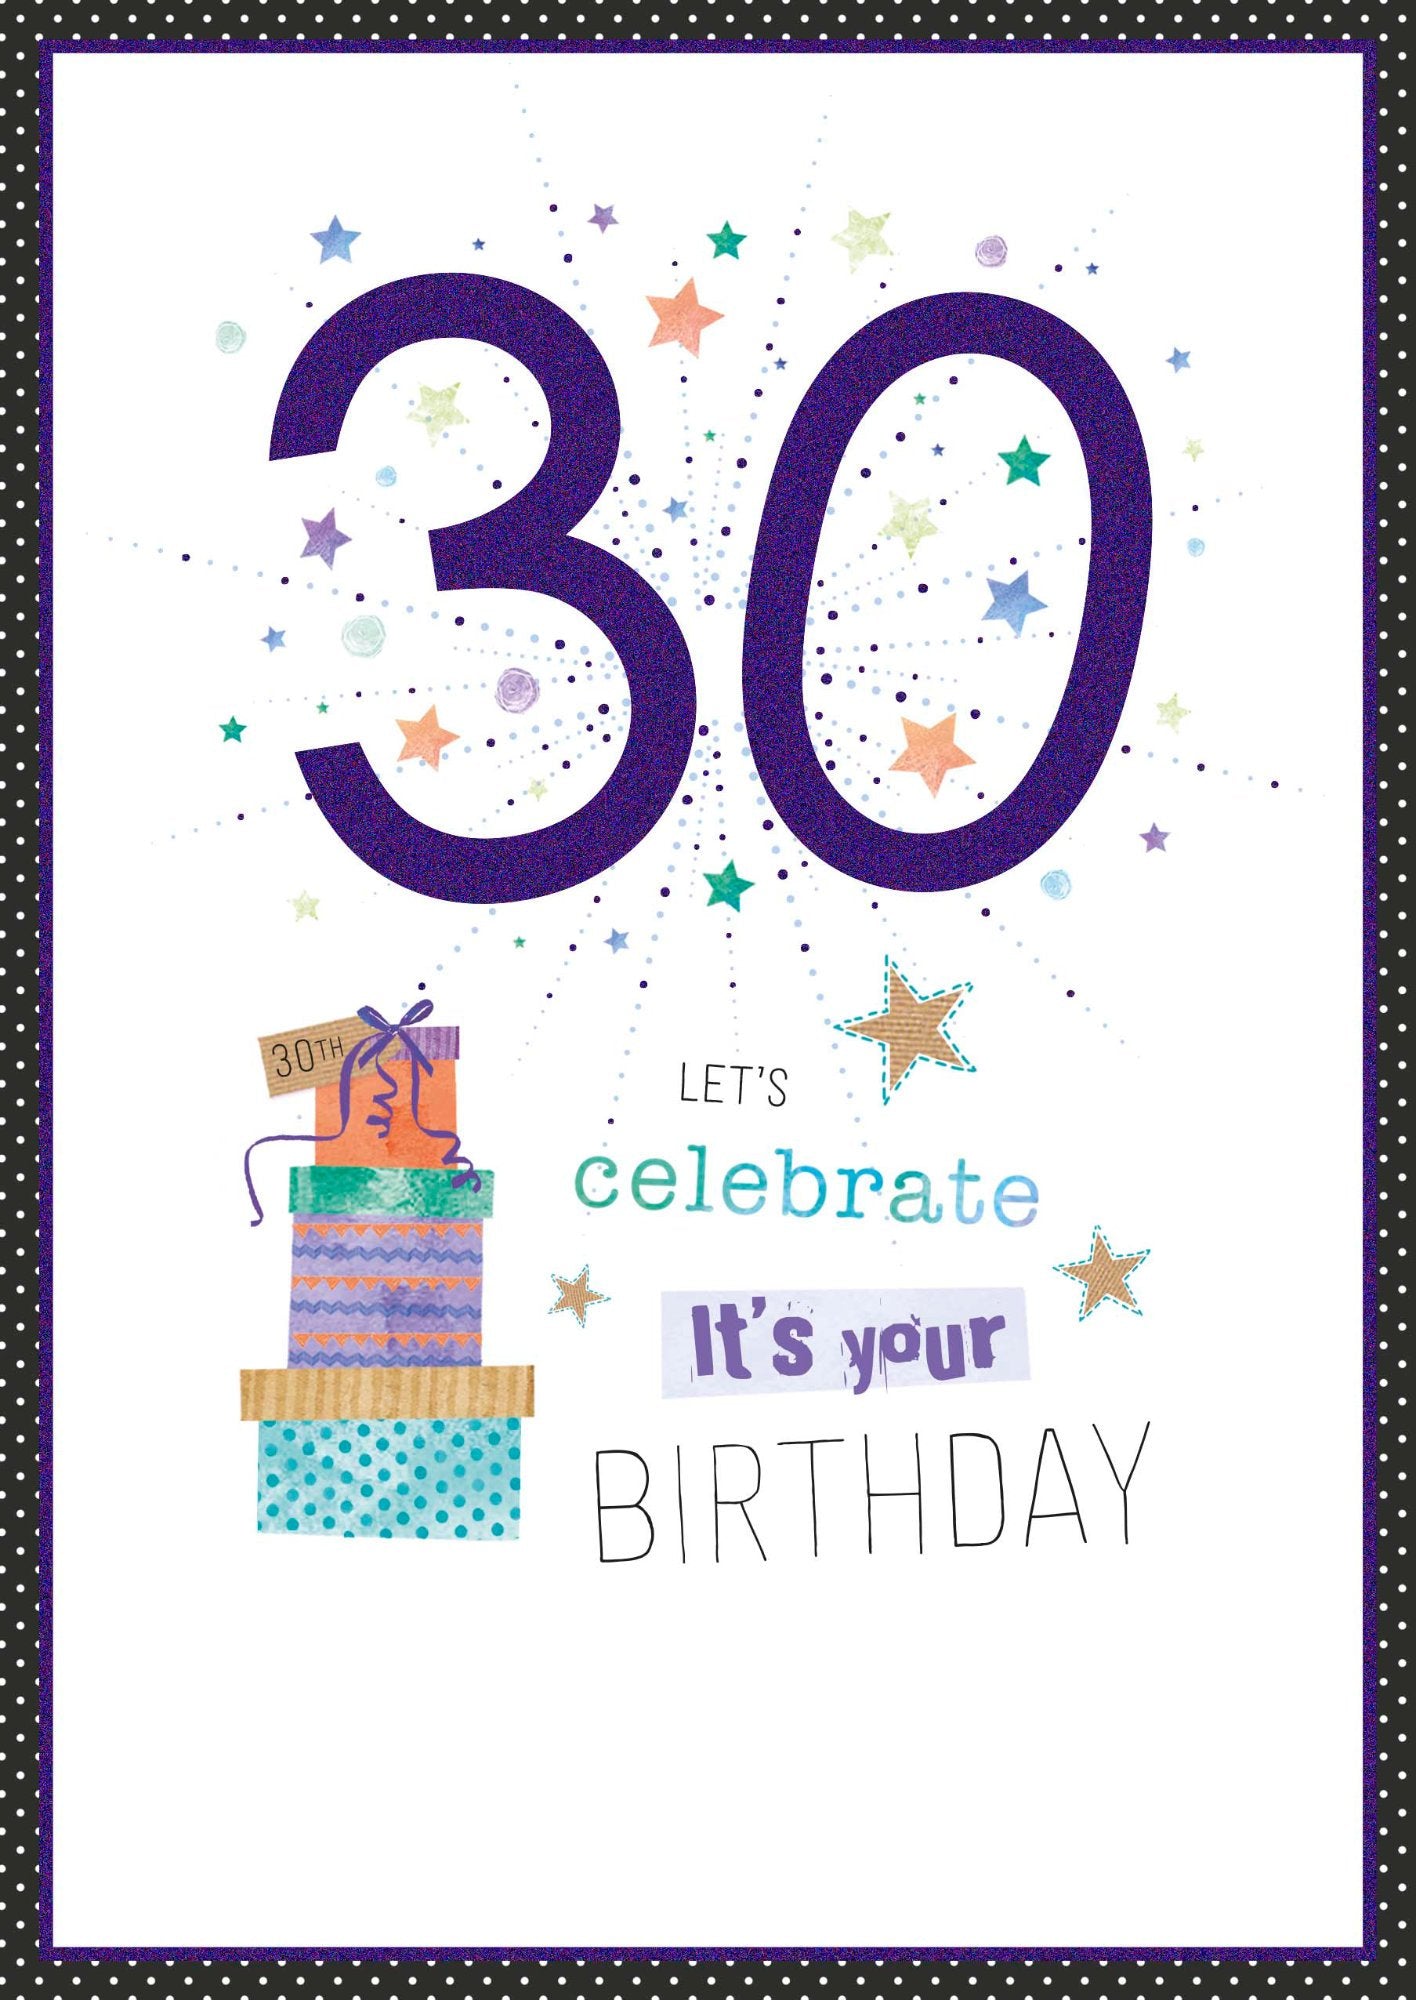 Photograph of 30th Birthday Celebrate Stars Greetings Card at Nicole's Shop